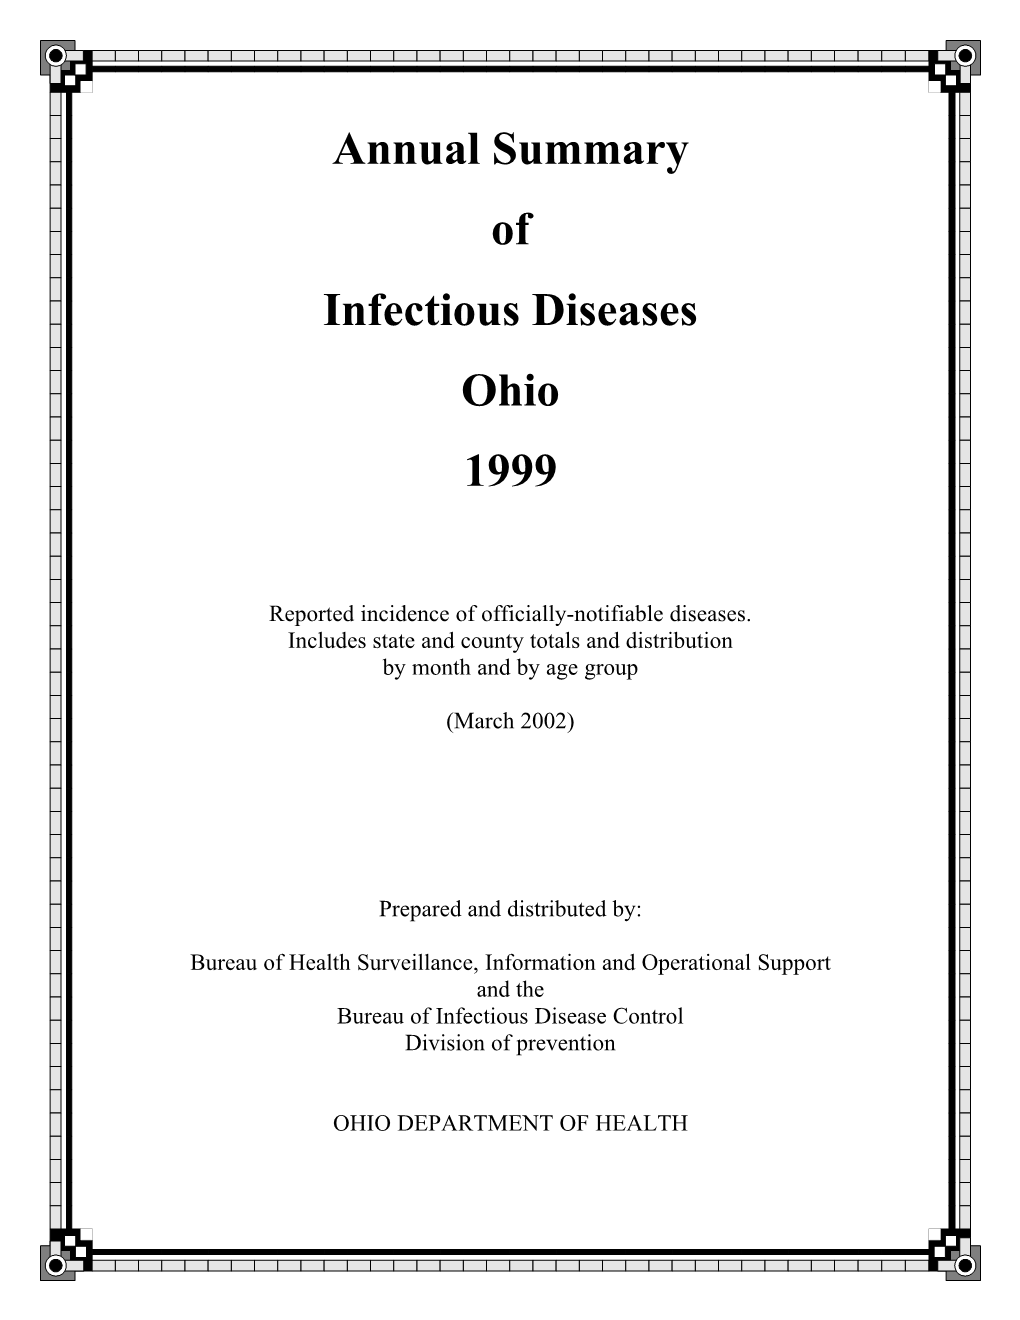 Annual Summary of Infectious Diseases Ohio 1999